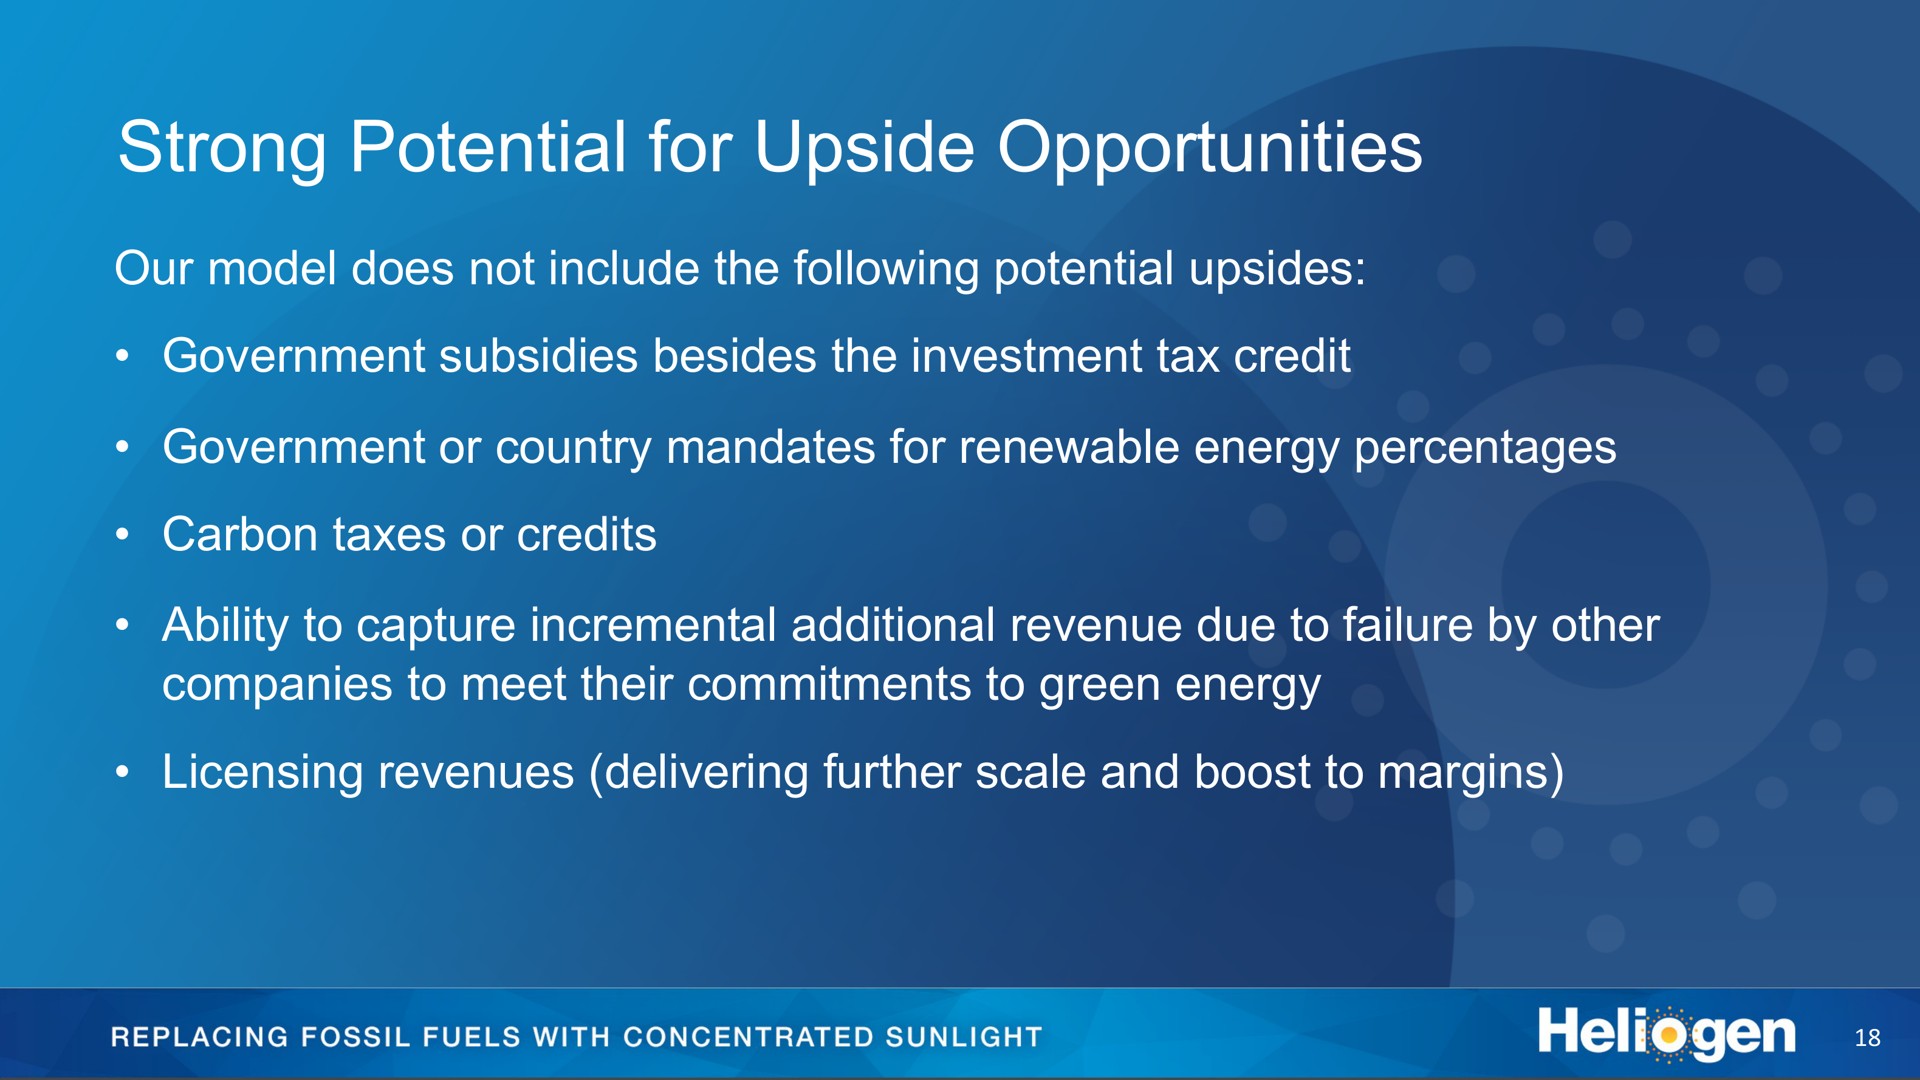 strong potential for upside opportunities our model does not include the following potential upsides government subsidies besides the investment tax credit government or country mandates for renewable energy percentages carbon taxes or credits ability to capture incremental additional revenue due to failure by other companies to meet their commitments to green energy licensing revenues delivering further scale and boost to margins replacing fossil fuels with concentrated sunlight | Heliogen